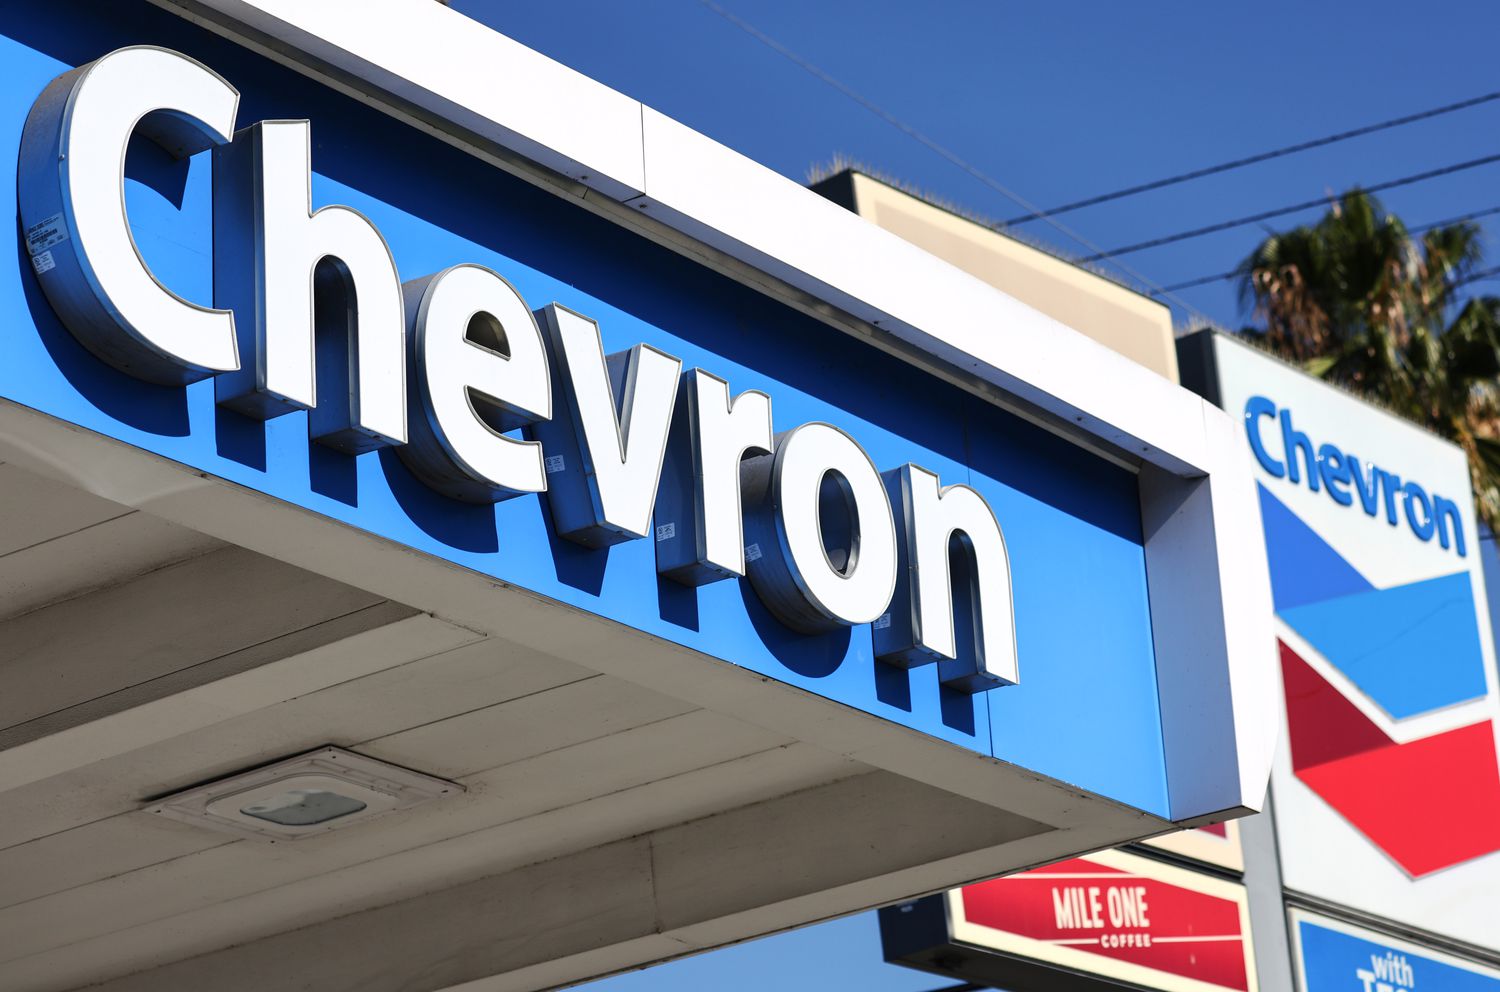 Chevron supports US shale oil with a new acquisition deal